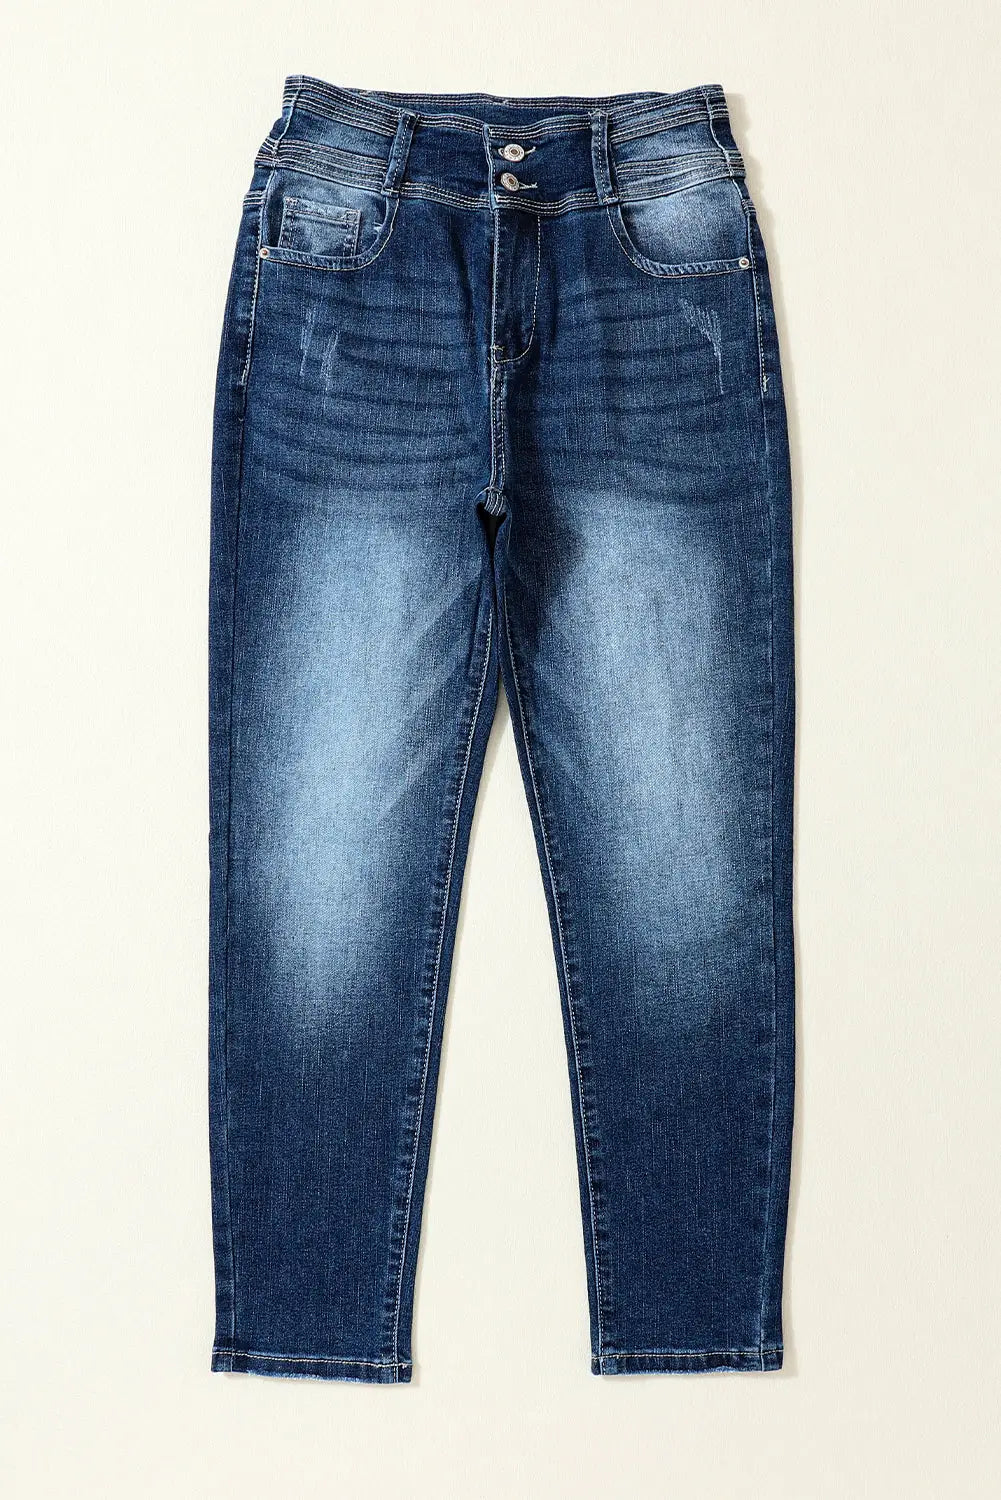 Blue vintage washed two-button high waist skinny jeans - bottoms